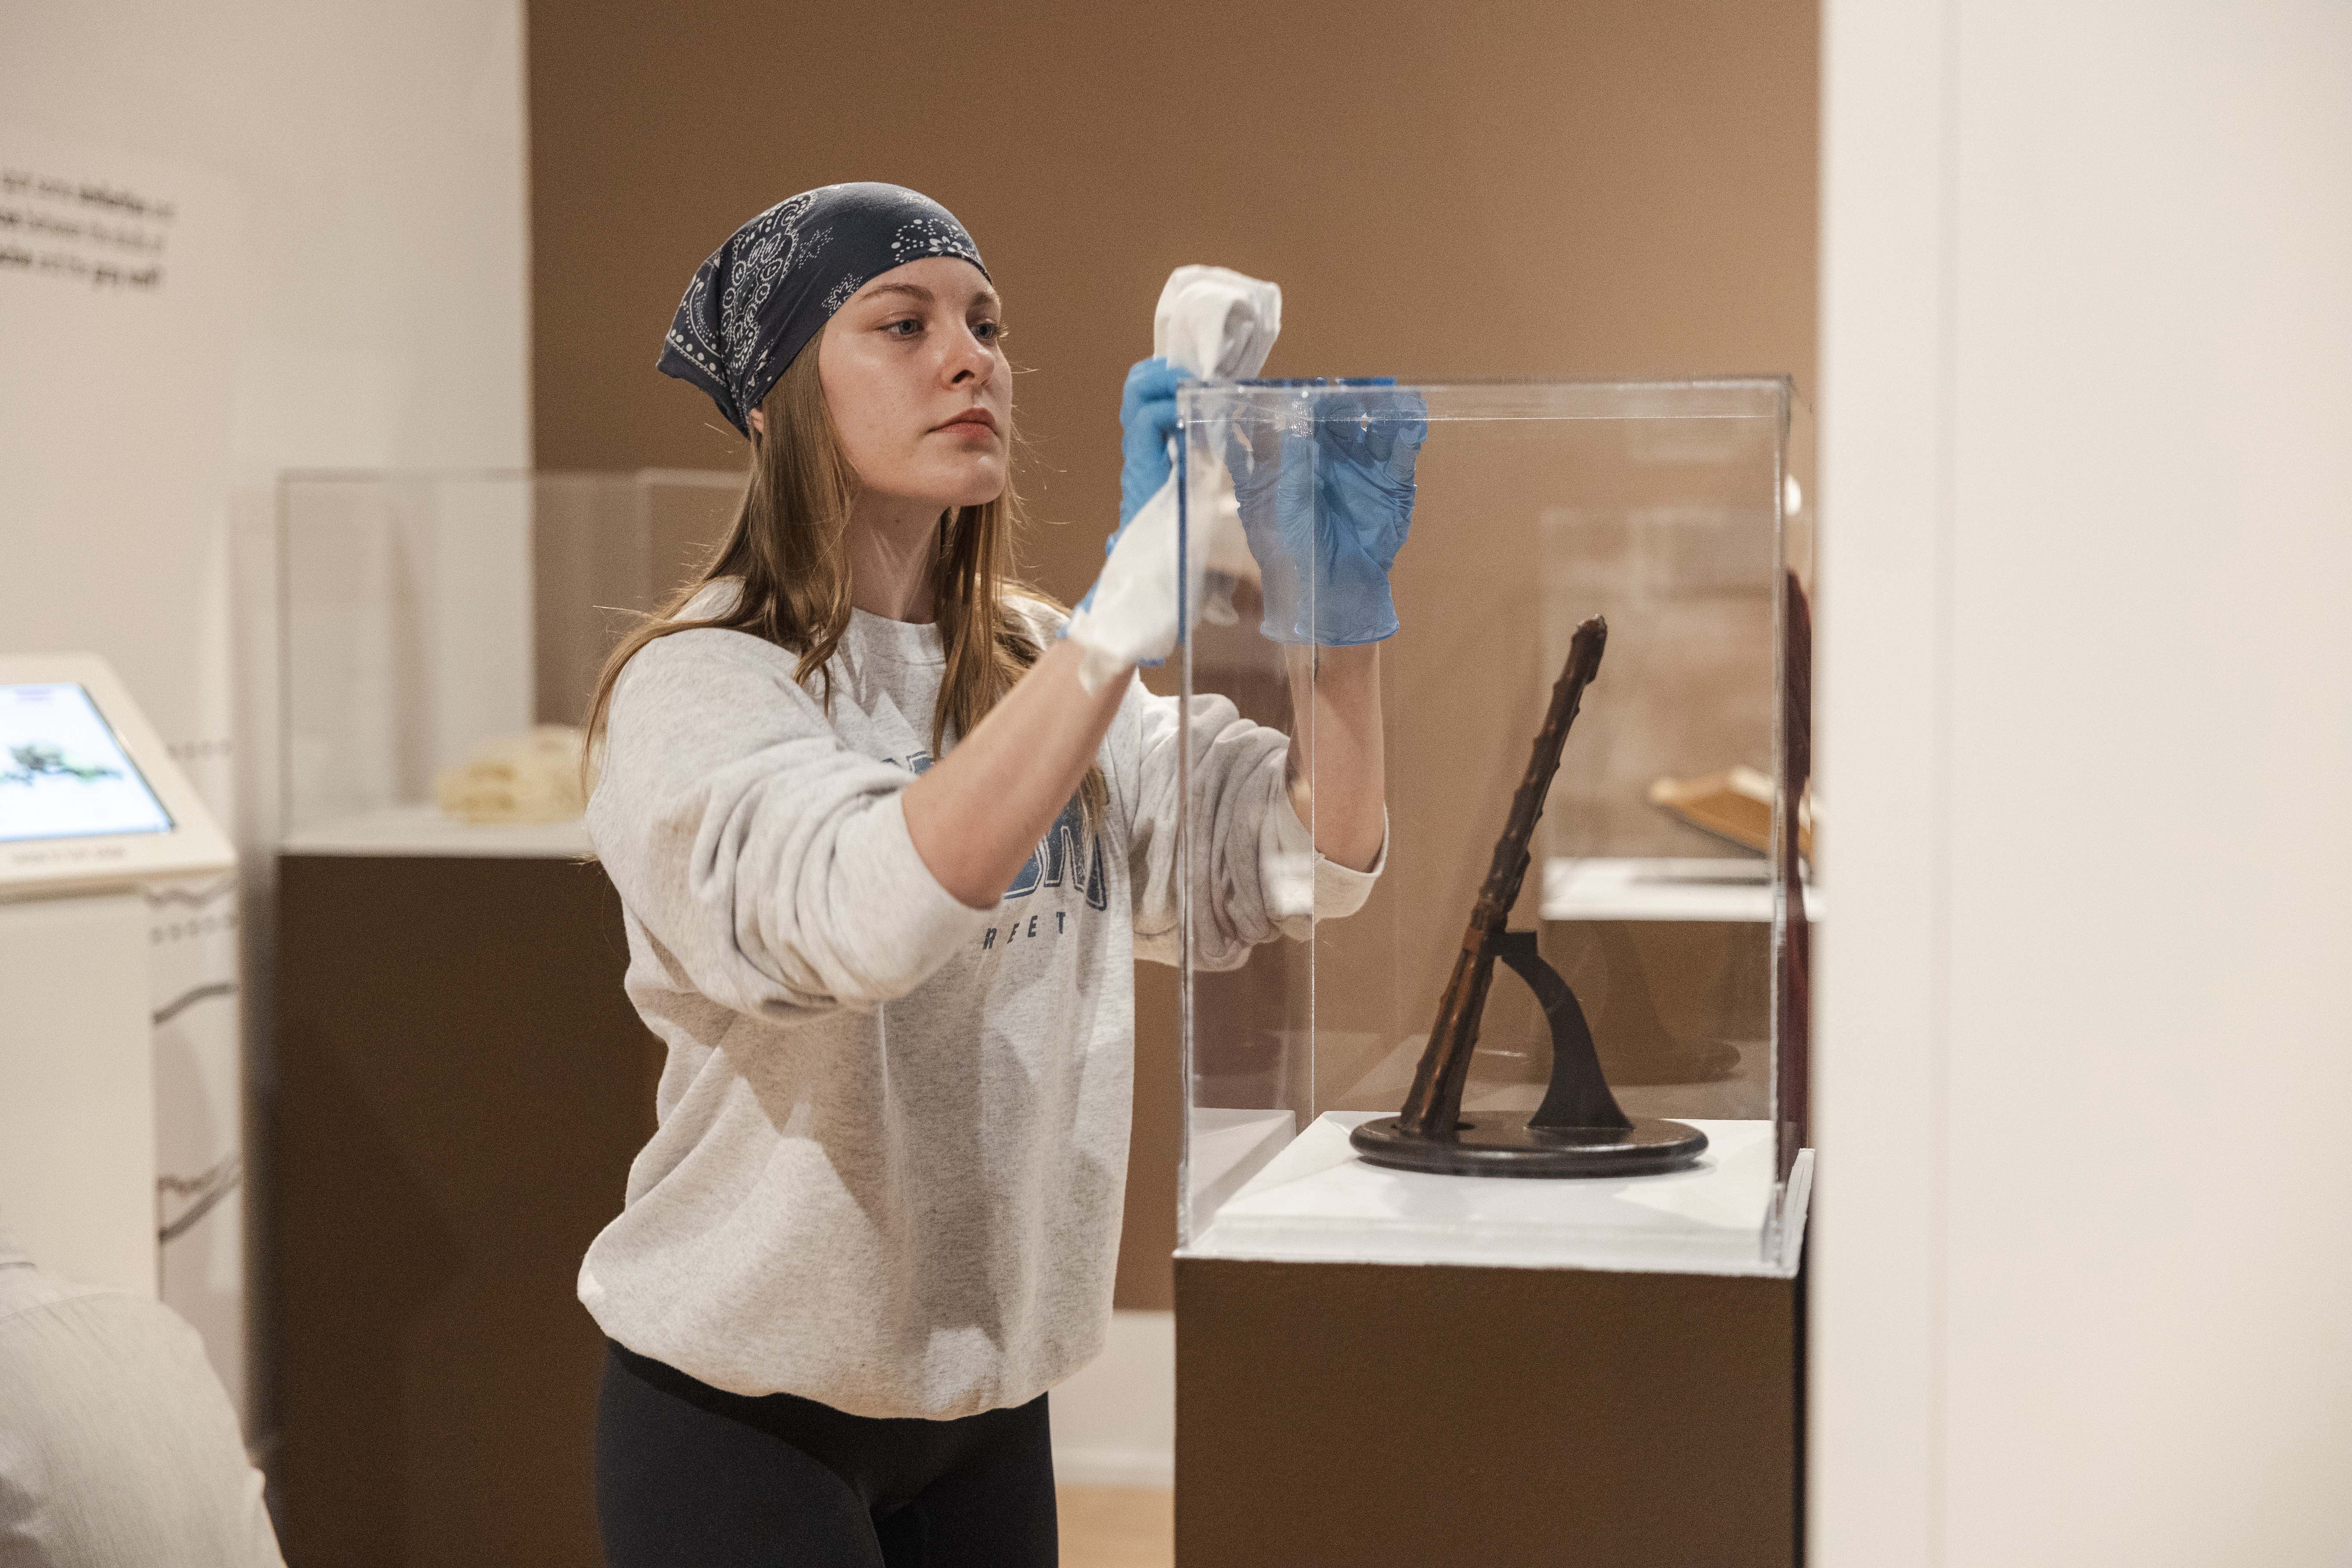 An OHIO Museum Studies Certificate program student wipes the glass of an exhibit.